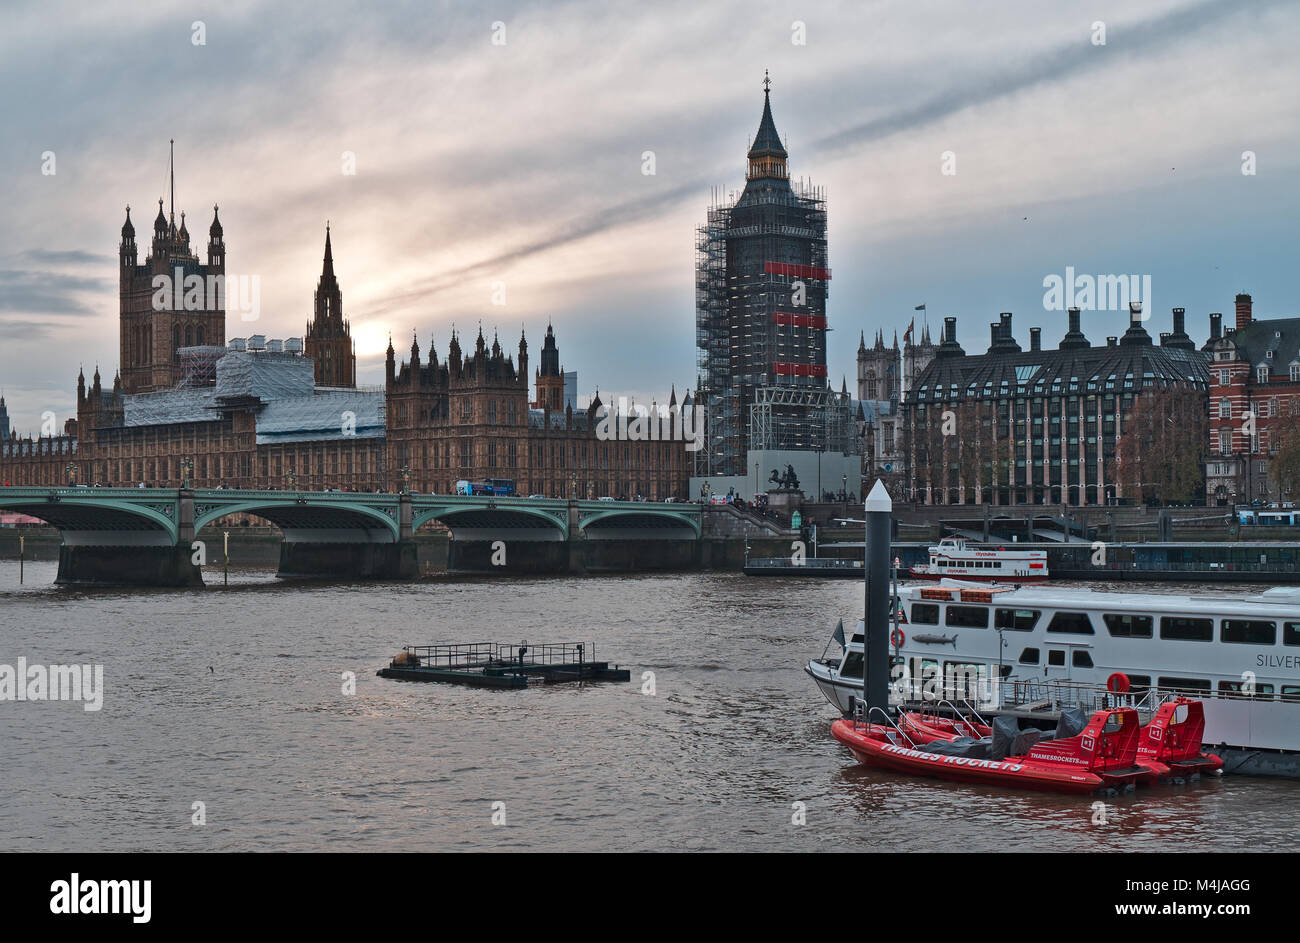 View of Westminster Palace and River Thames. London, UK Stock Photo